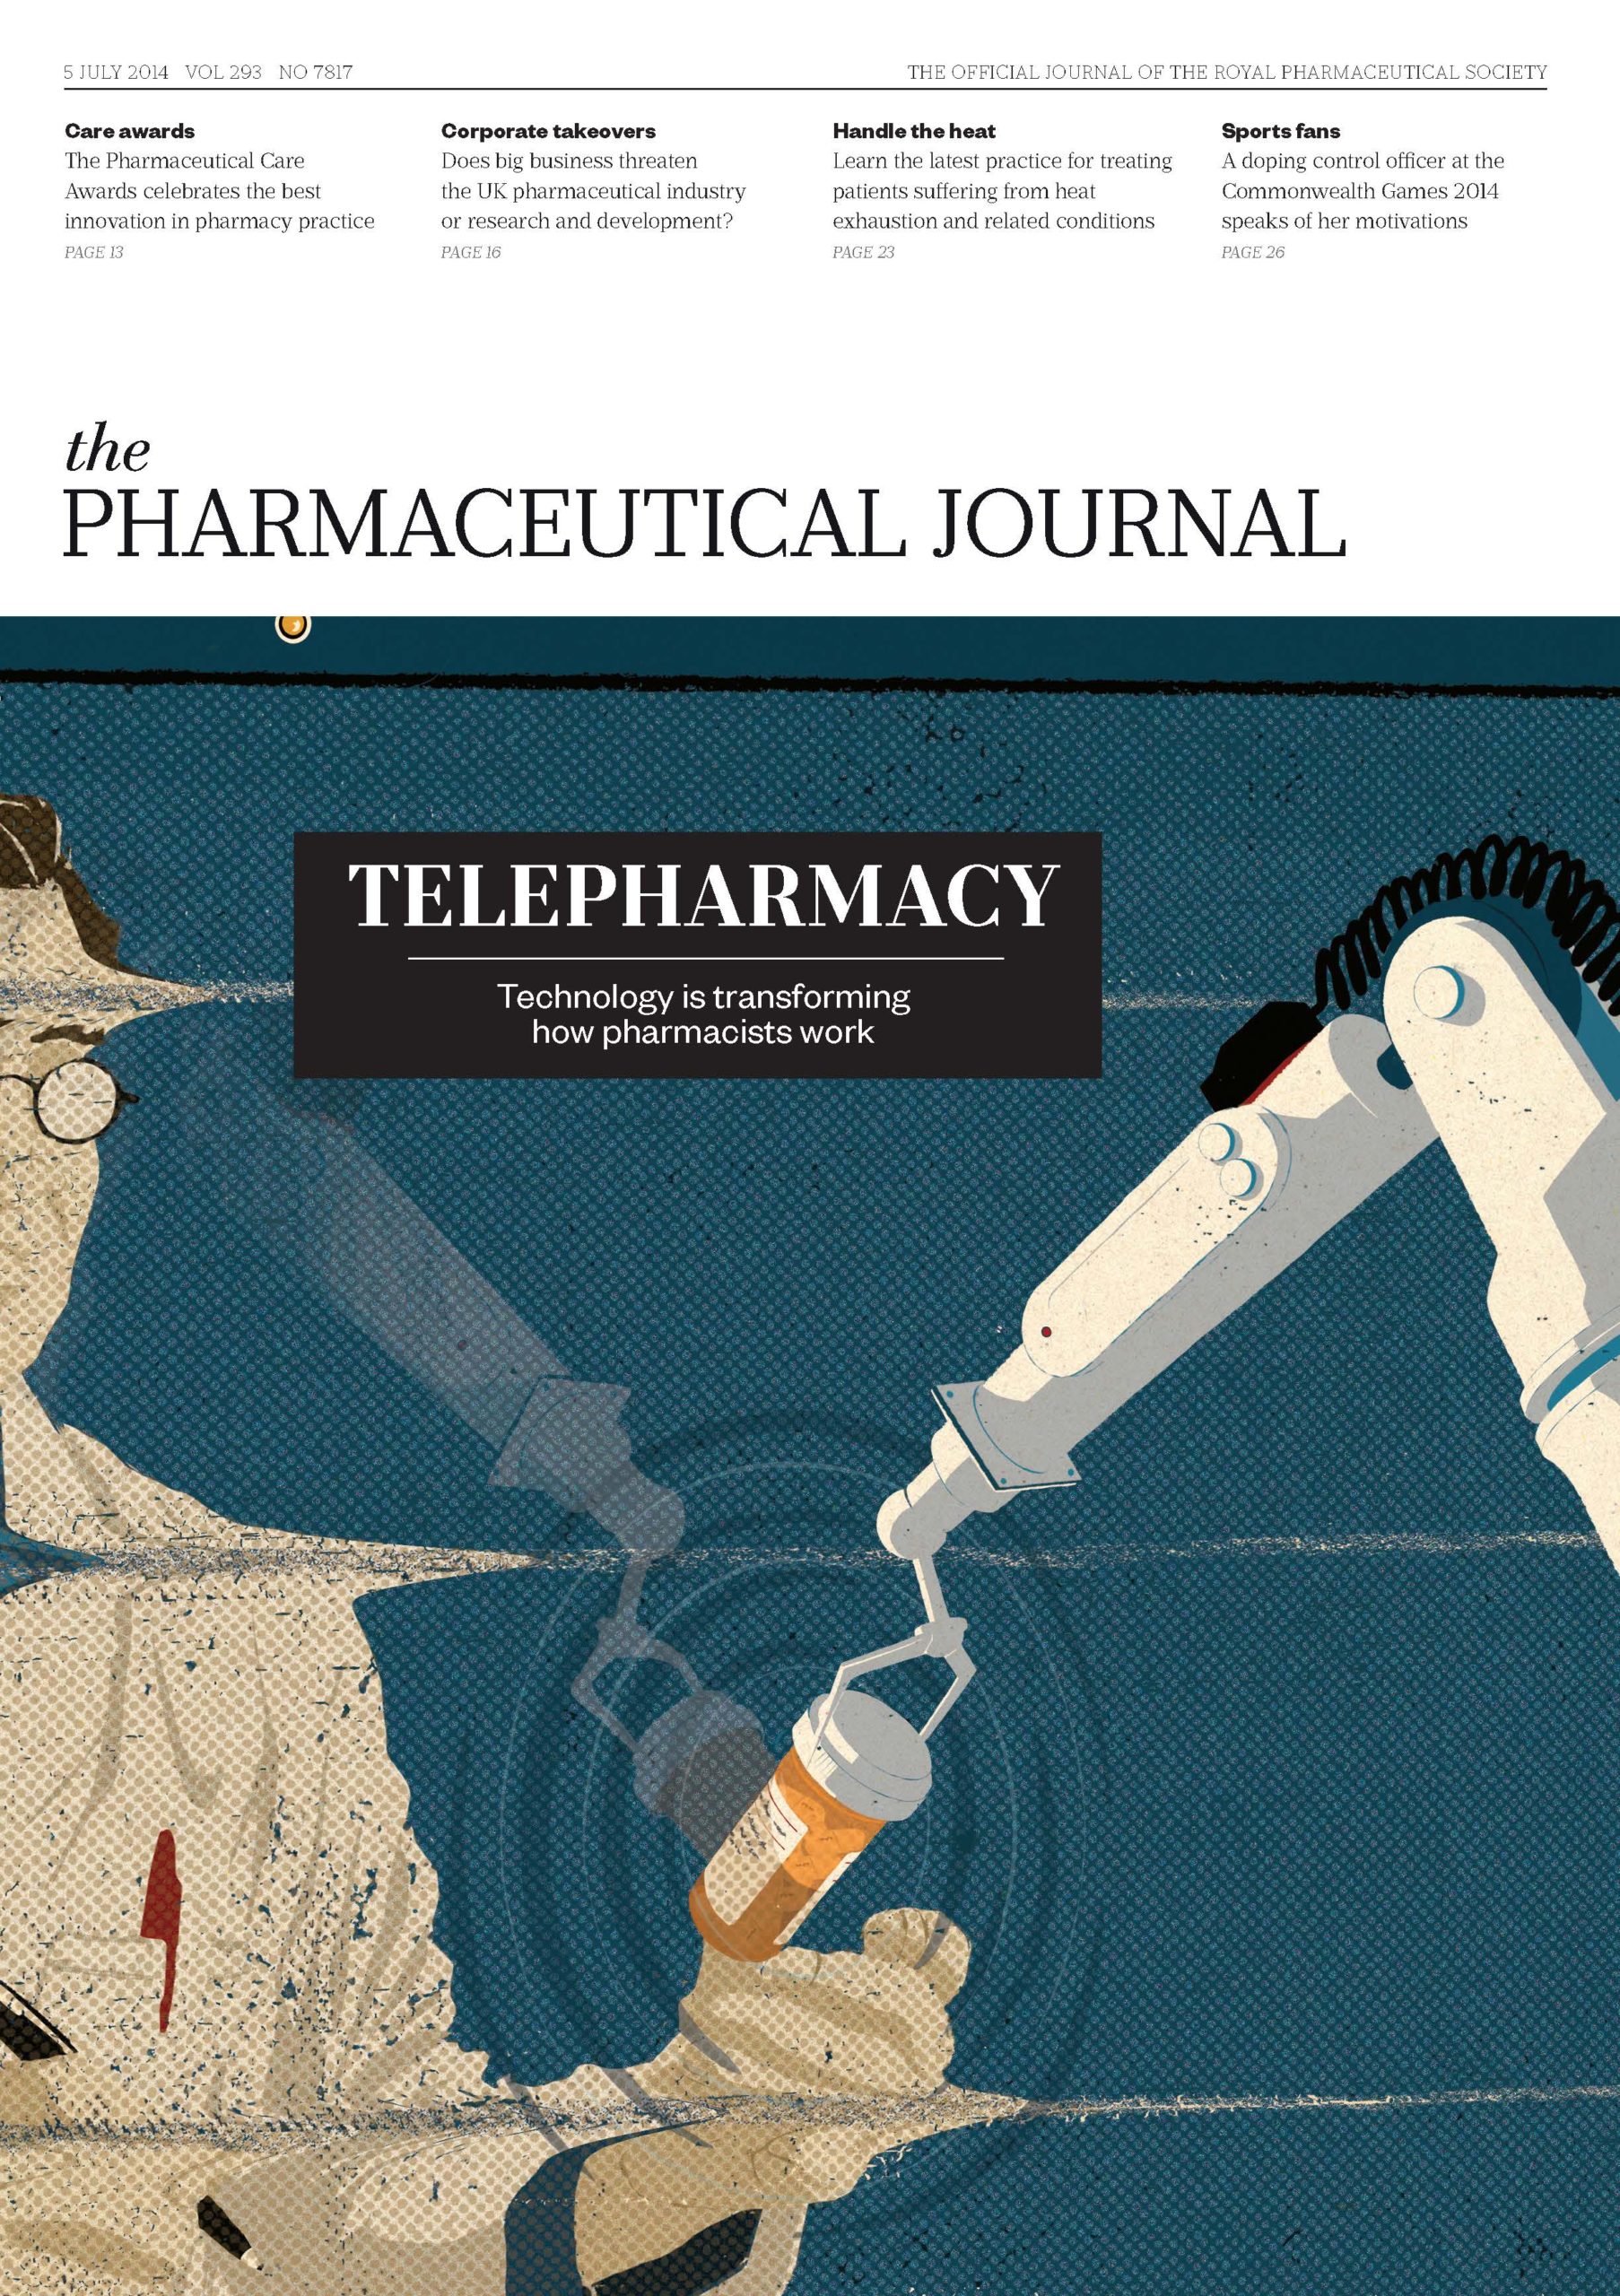 Publication issue cover for PJ, 5 July 2014, Vol 293, No 7817